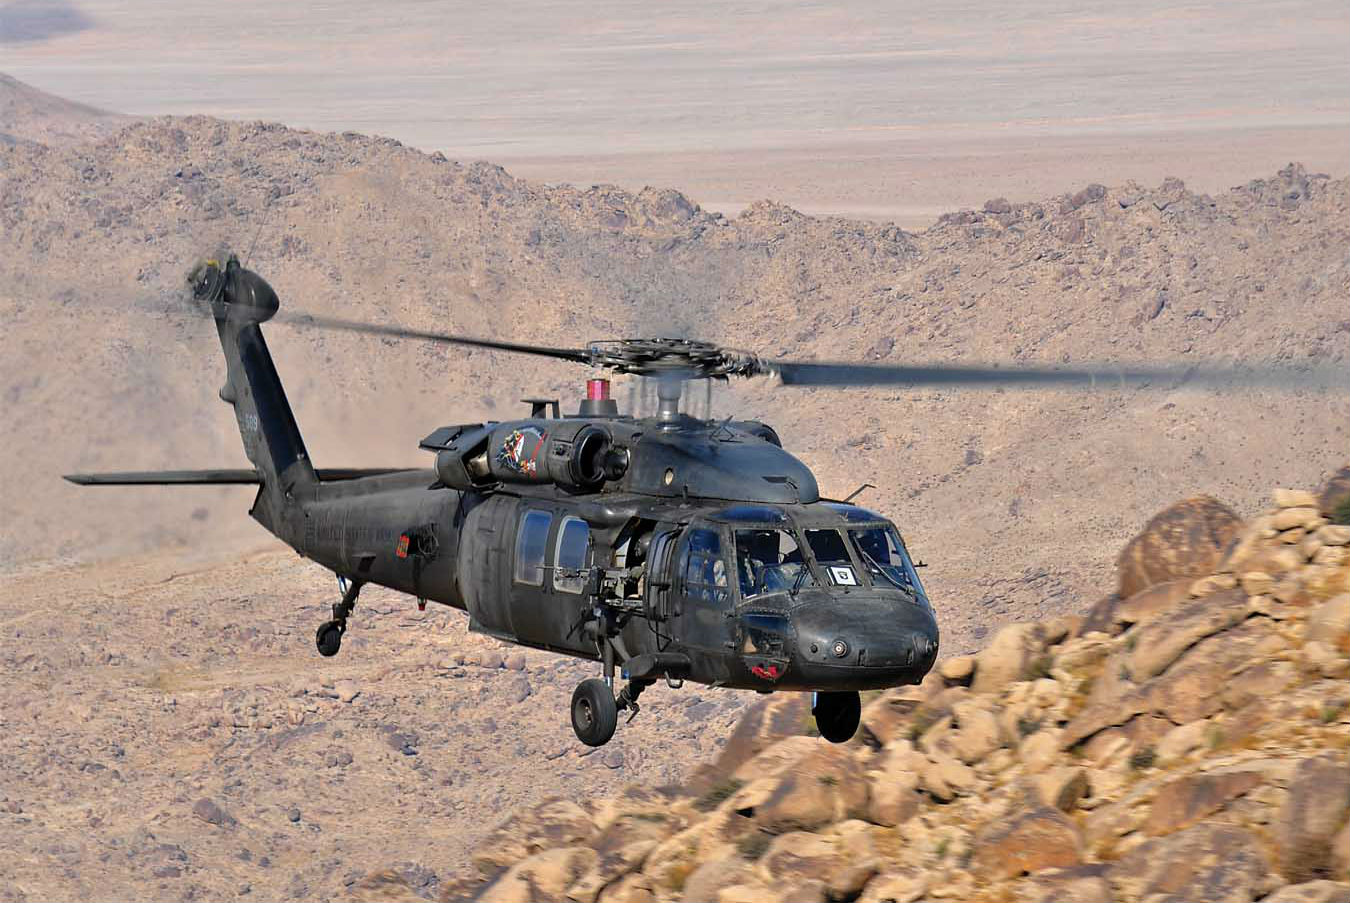 Introduced in 1989, the uprated UH-60L "Lima" had a 20 percent increase in power and could carry 1,000 lb. (450 kg) more payload than the last UH-60As Sikorsky built. They were widely deployed to Afghanistan and Iraq. Graham Lavery Photo